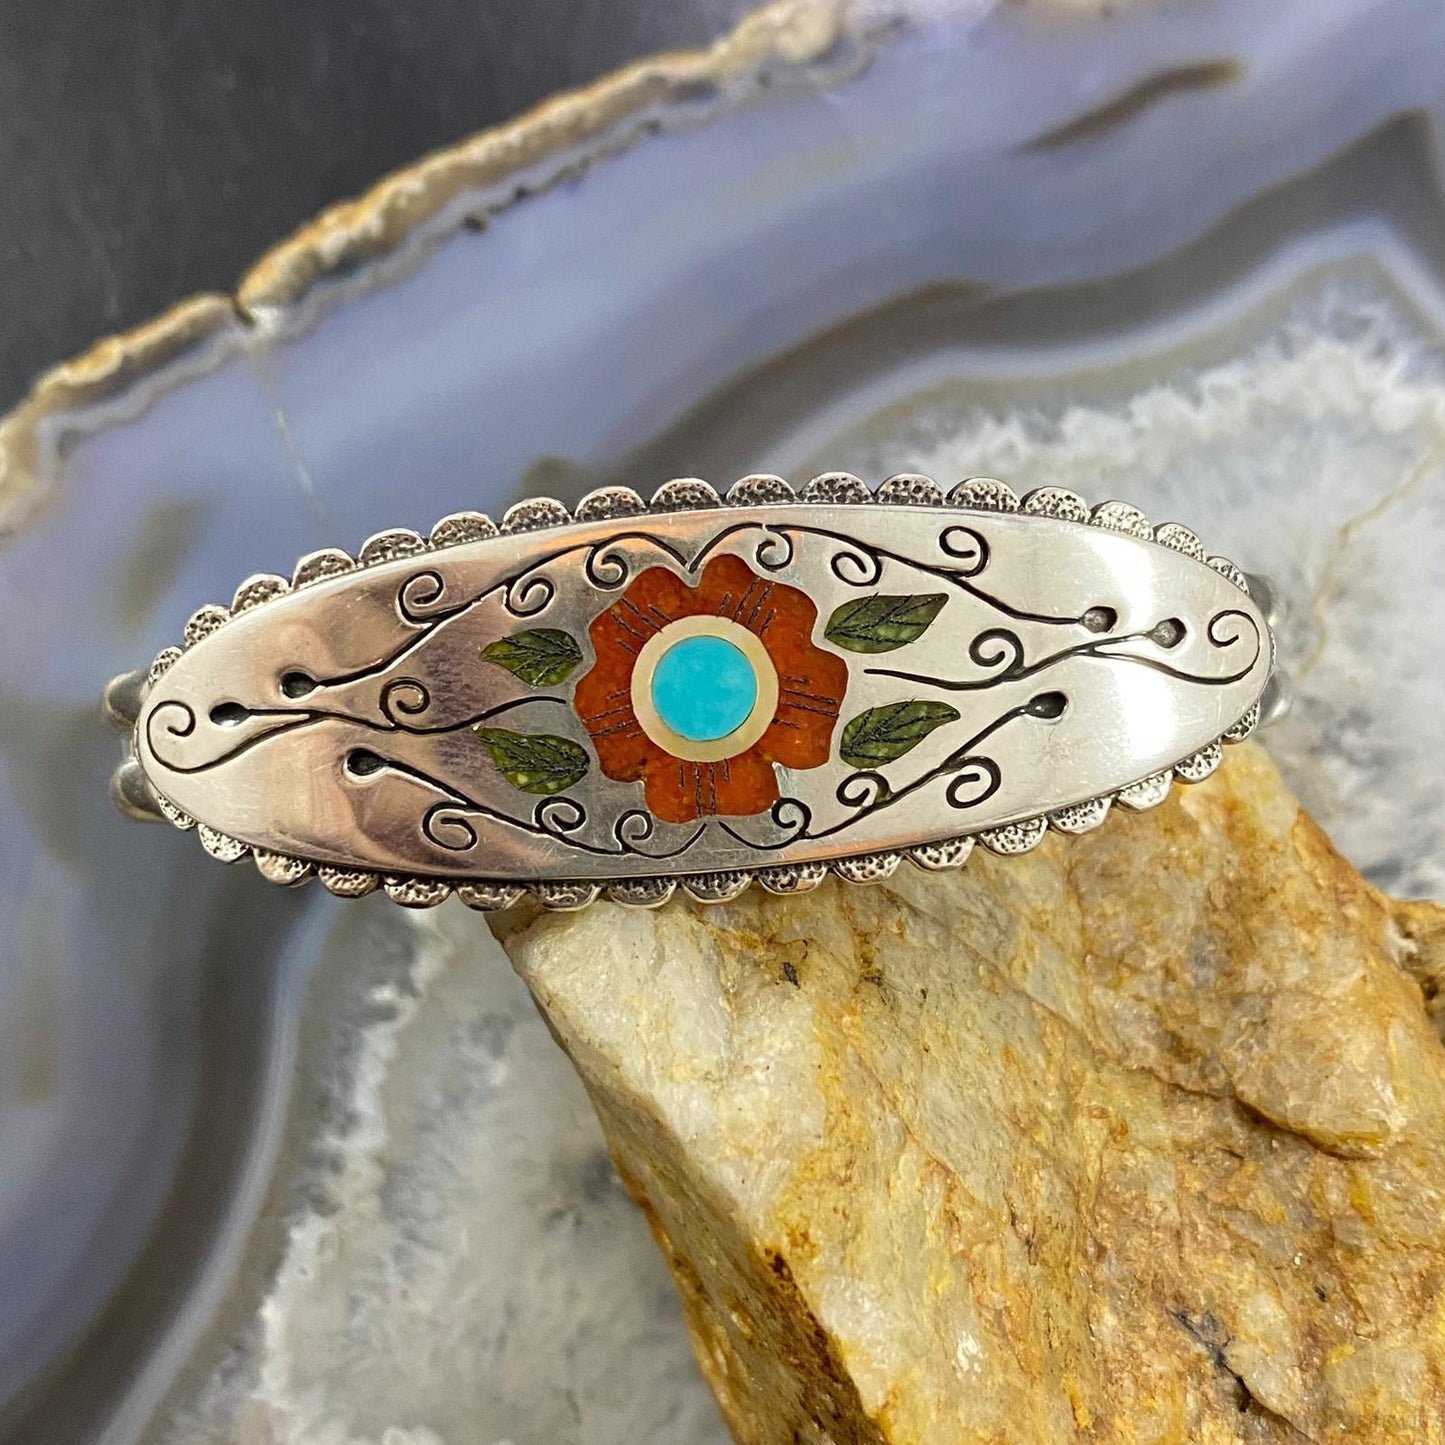 RN Laconsello and Carolyn Pollack Southwestern Style Sterling Silver Inlay Flower Bracelet For Women